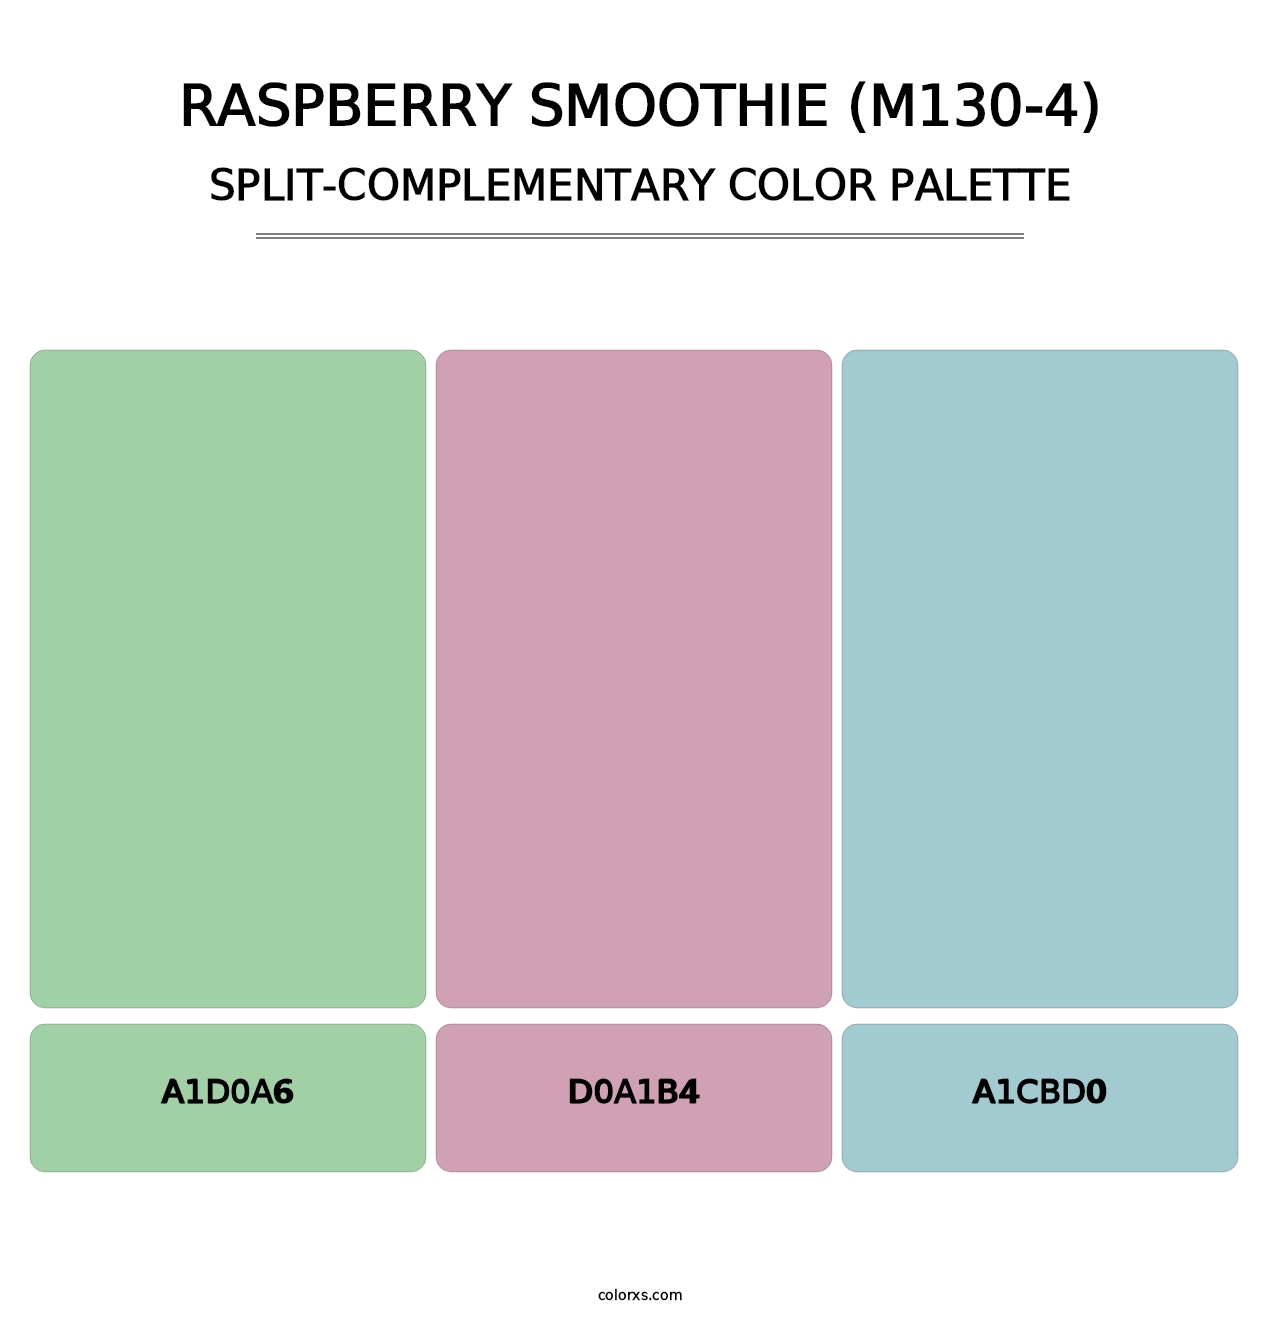 Raspberry Smoothie (M130-4) - Split-Complementary Color Palette